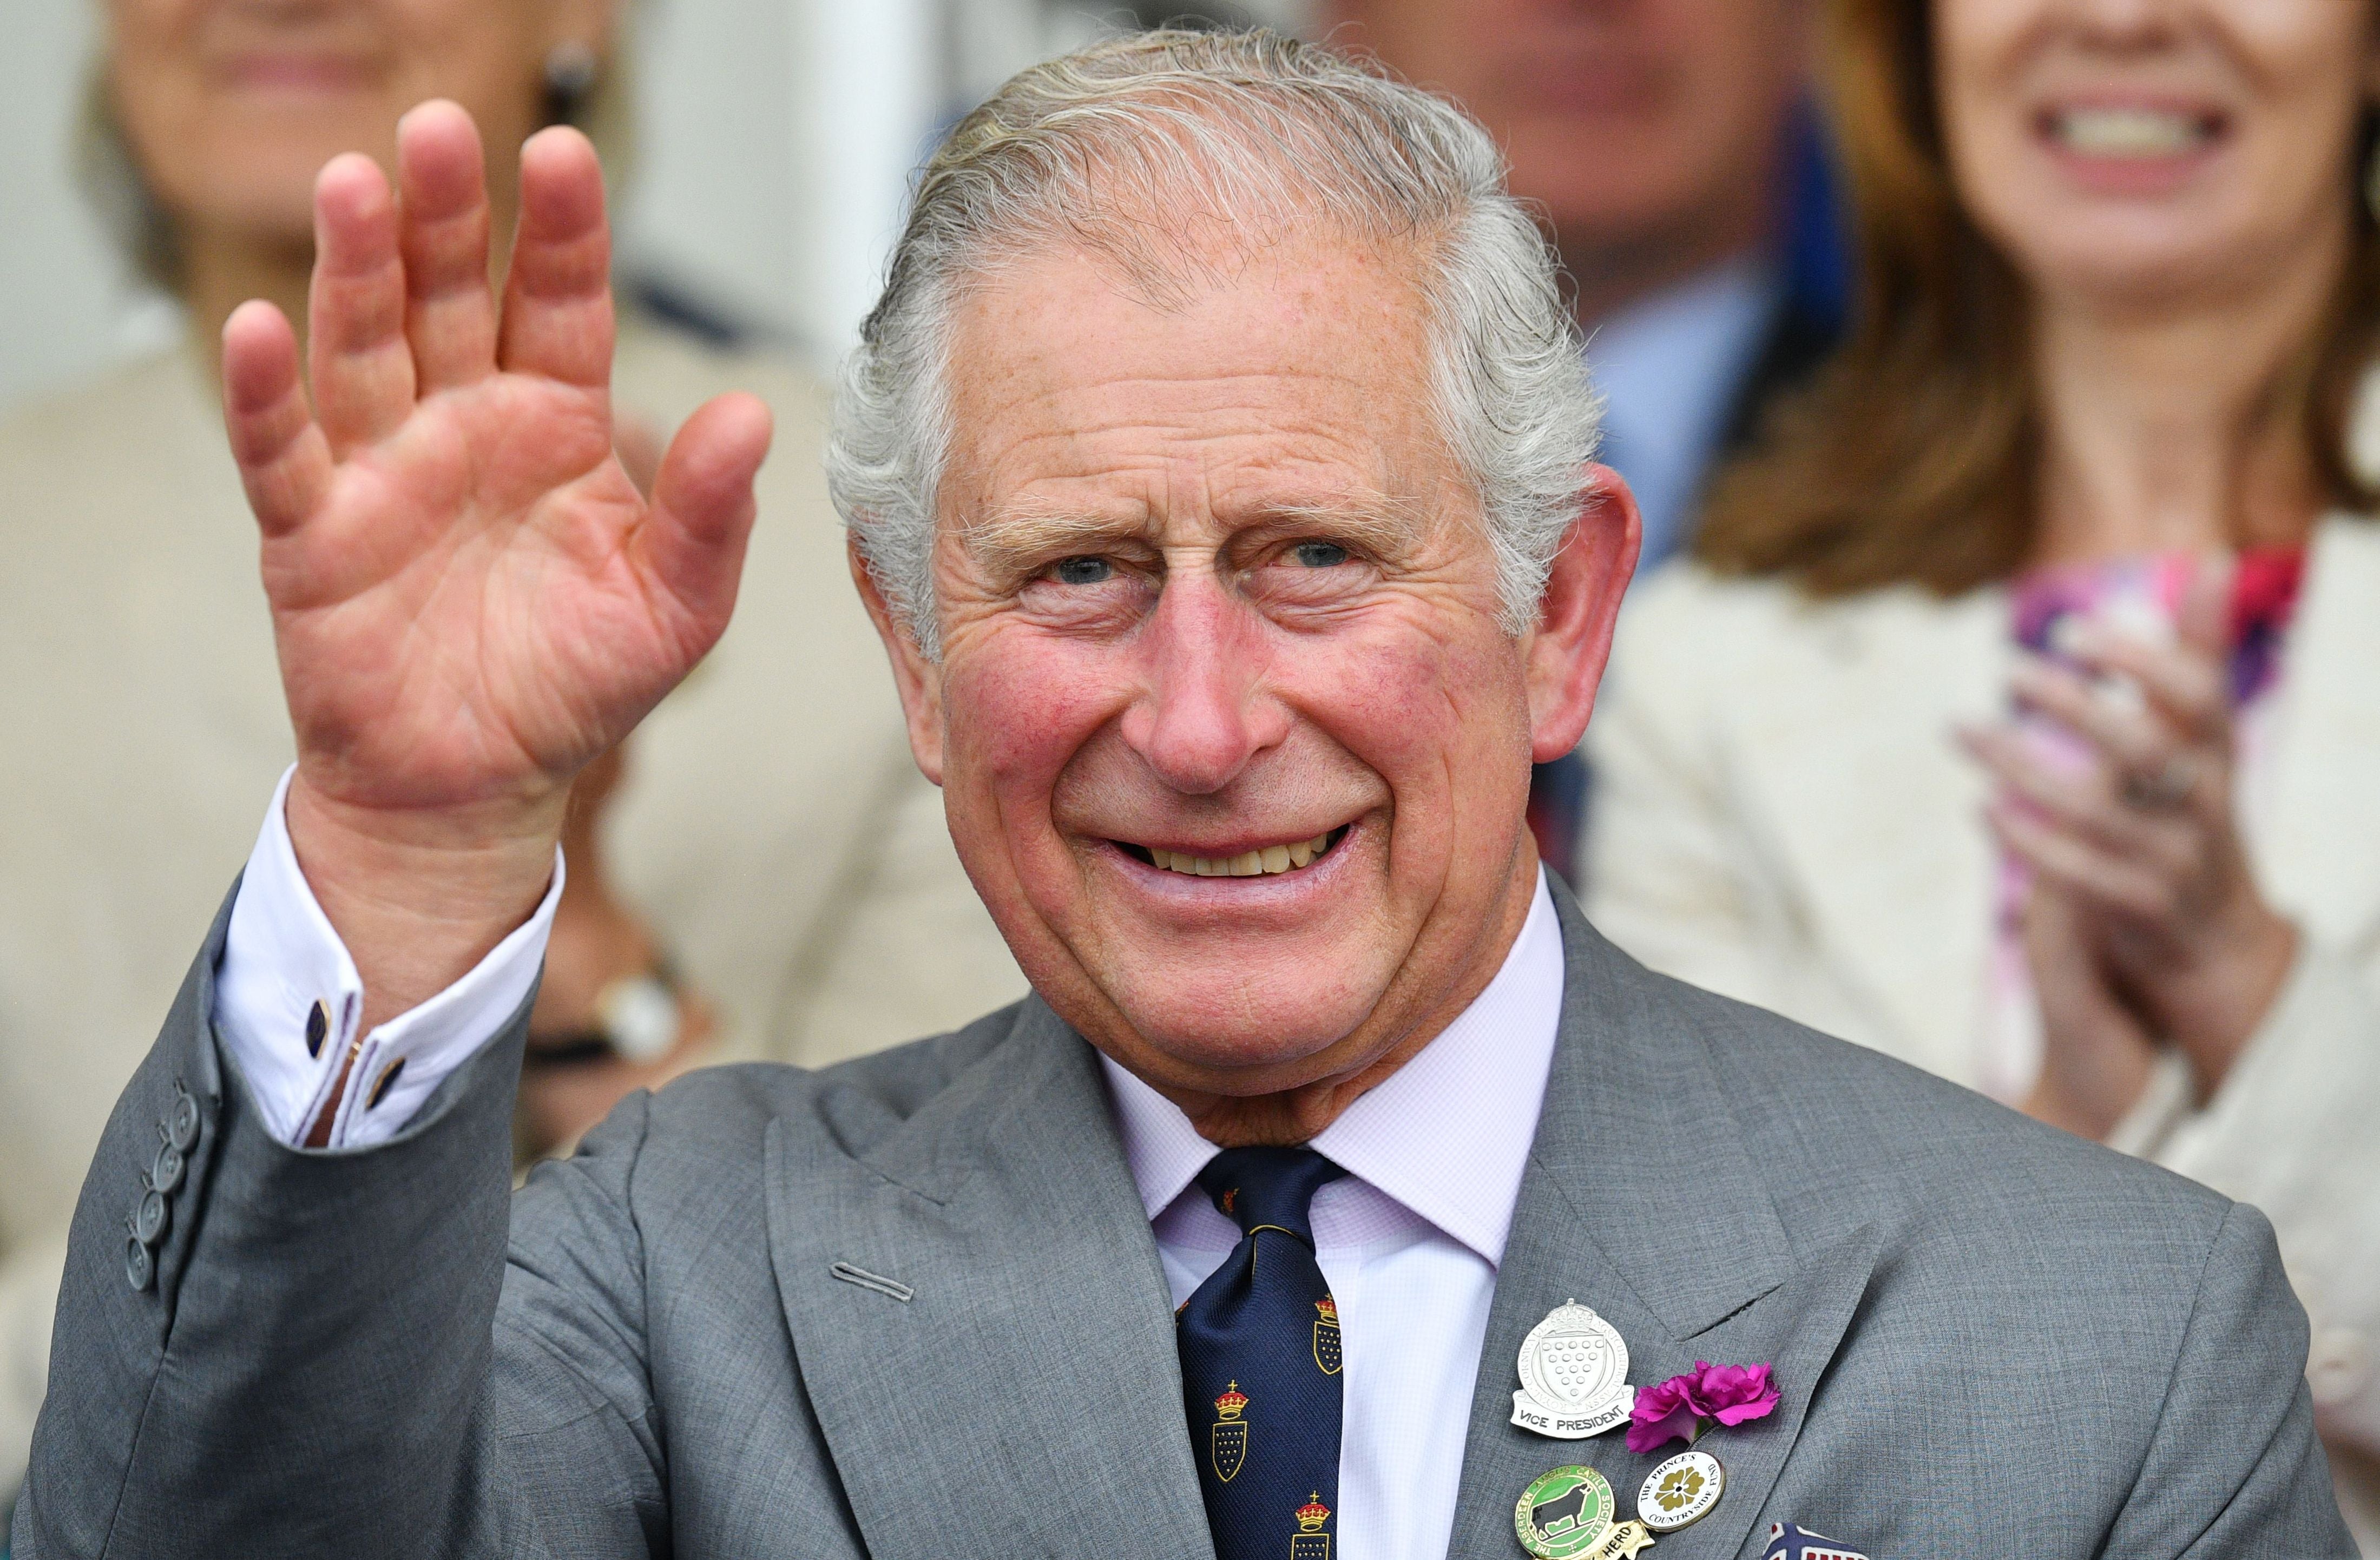 King Charles has spoken for the first time since his diagnosis was made public one week ago